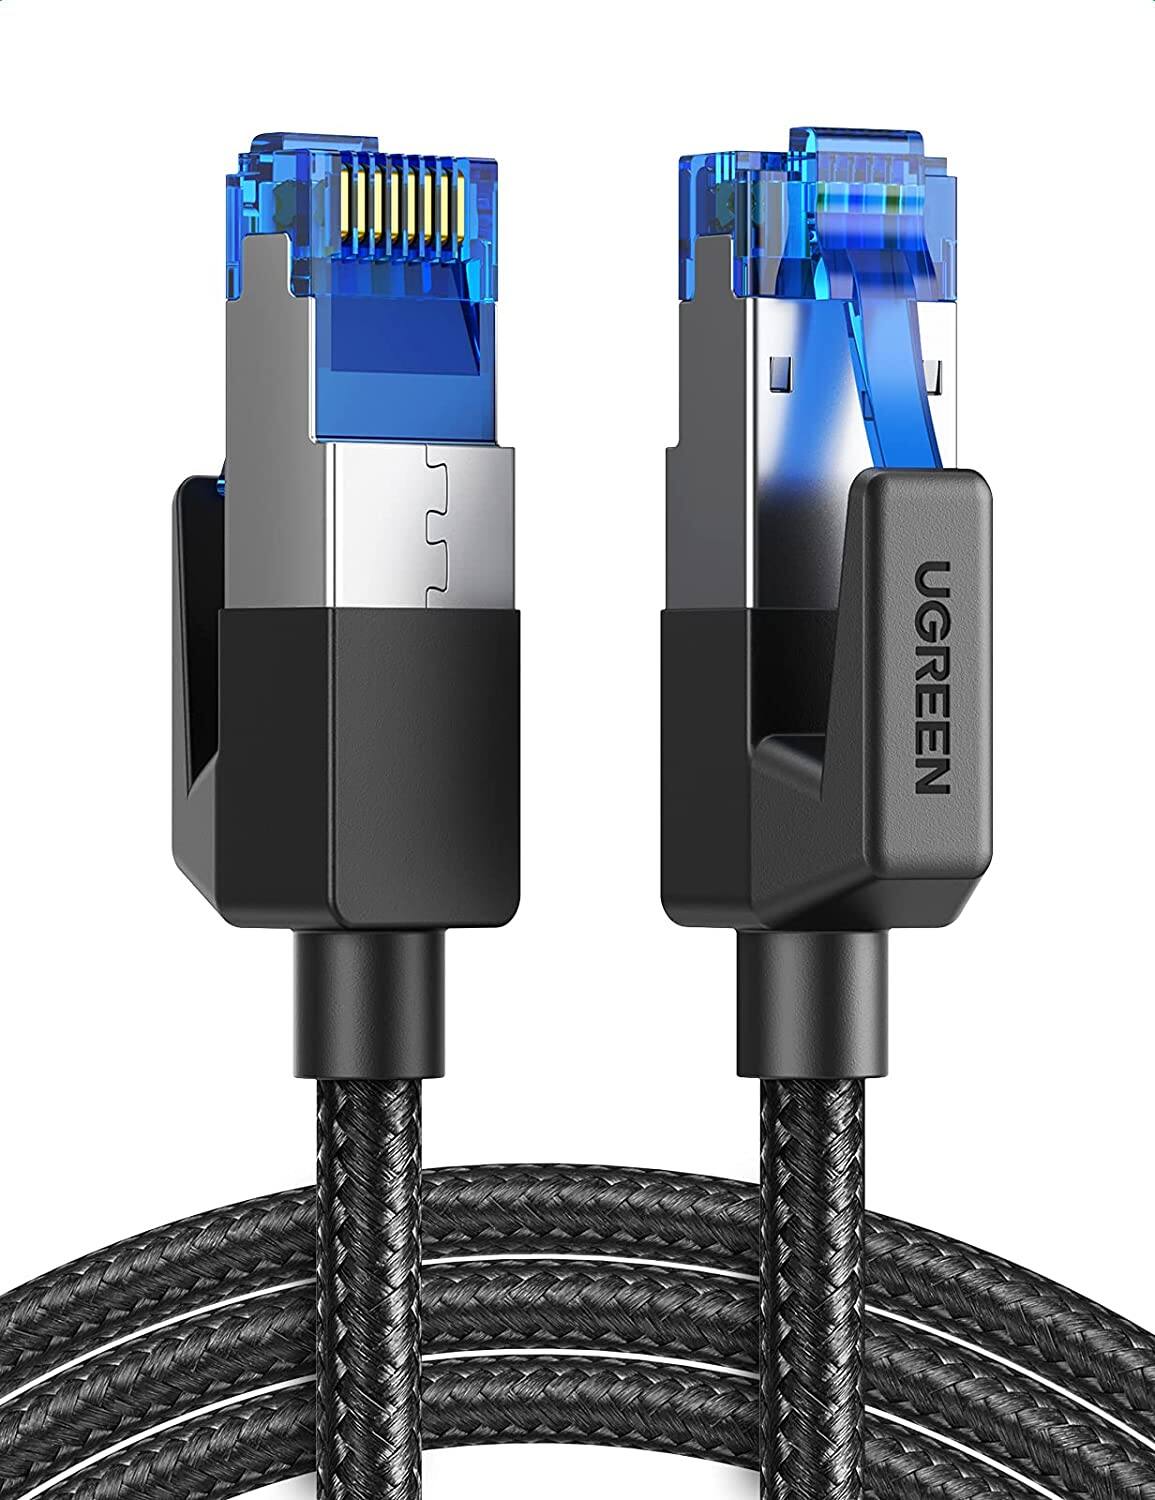 UGREEN Cat 8 Ethernet Cable 6FT 40Gbps 2000Mhz High Speed $5.24 + Free Shipping w/ Amazon Prime or Orders $25+